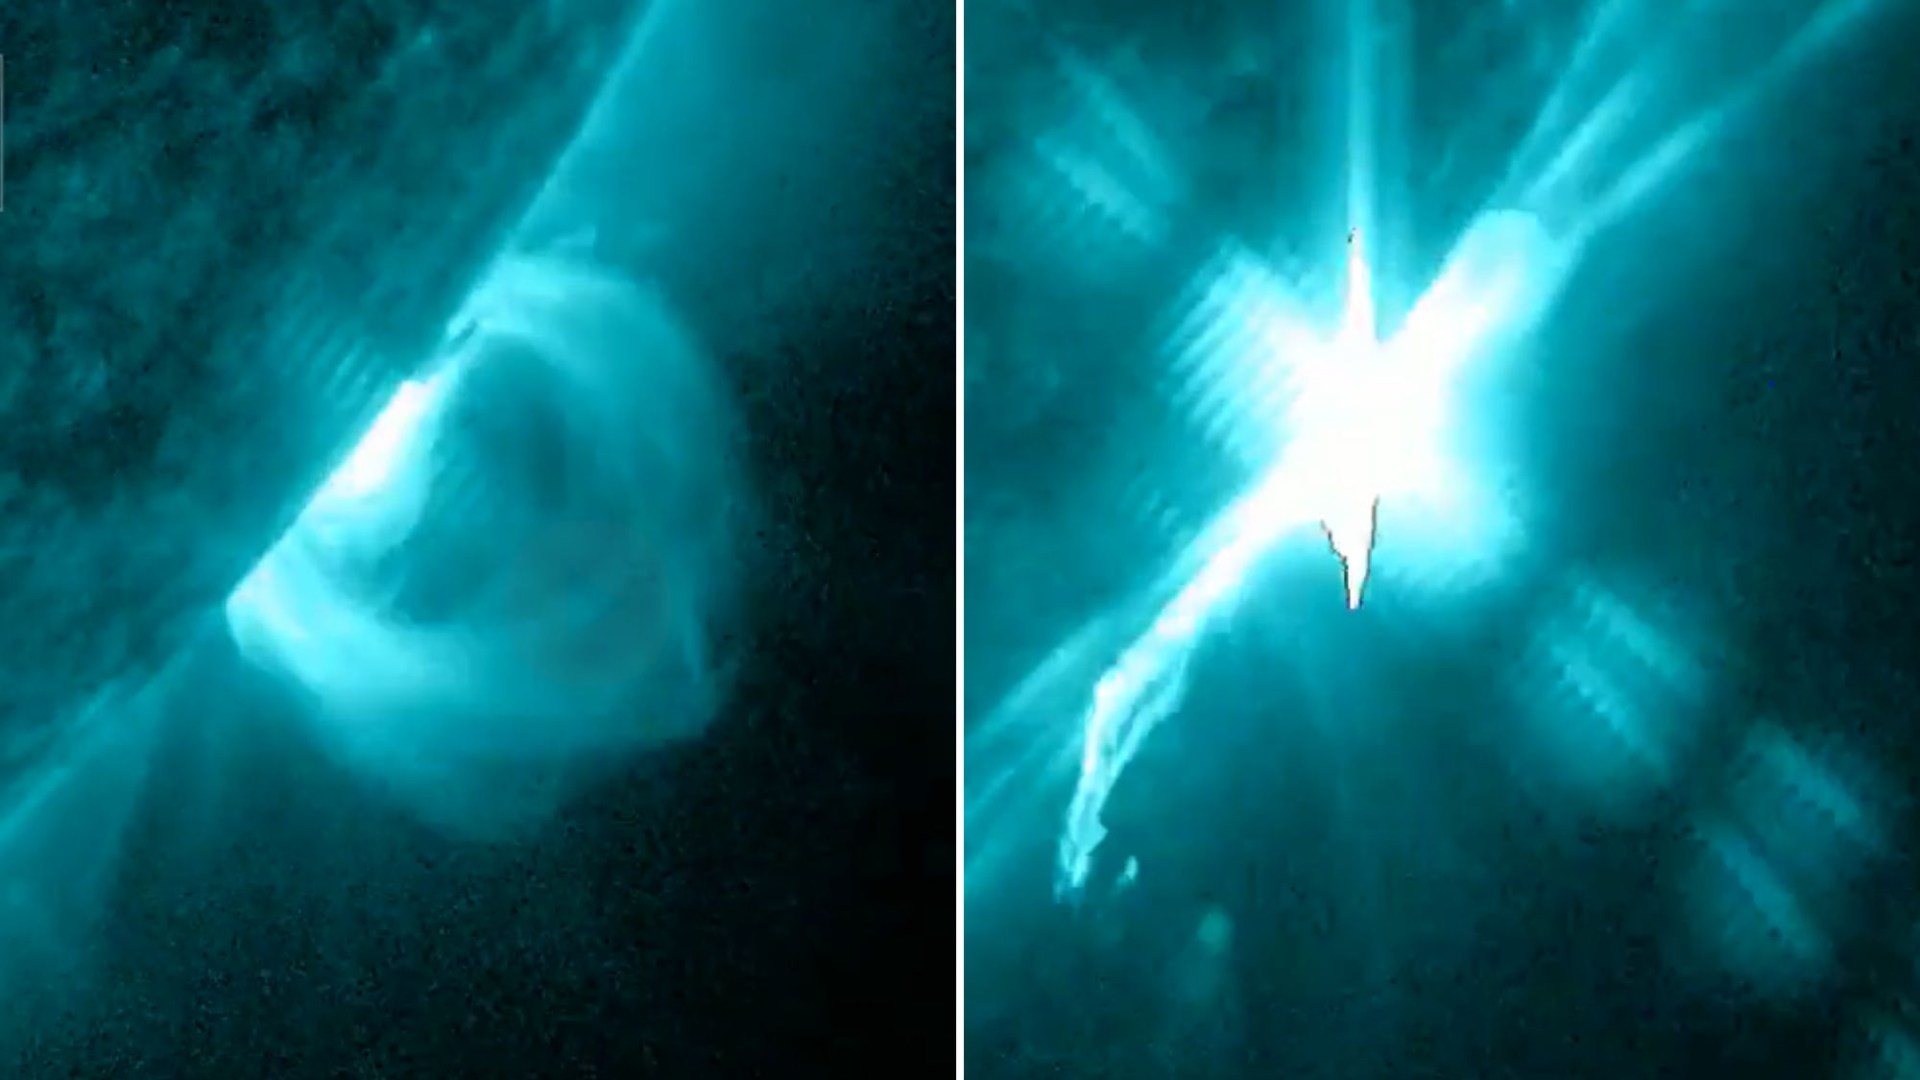 “Uncover the breathtaking power of a massive solar flare capable of knocking out power from the sun” – Solar Flare, Massive Solar Flare, Power Outage, Sun Explosion, Incredible Moment